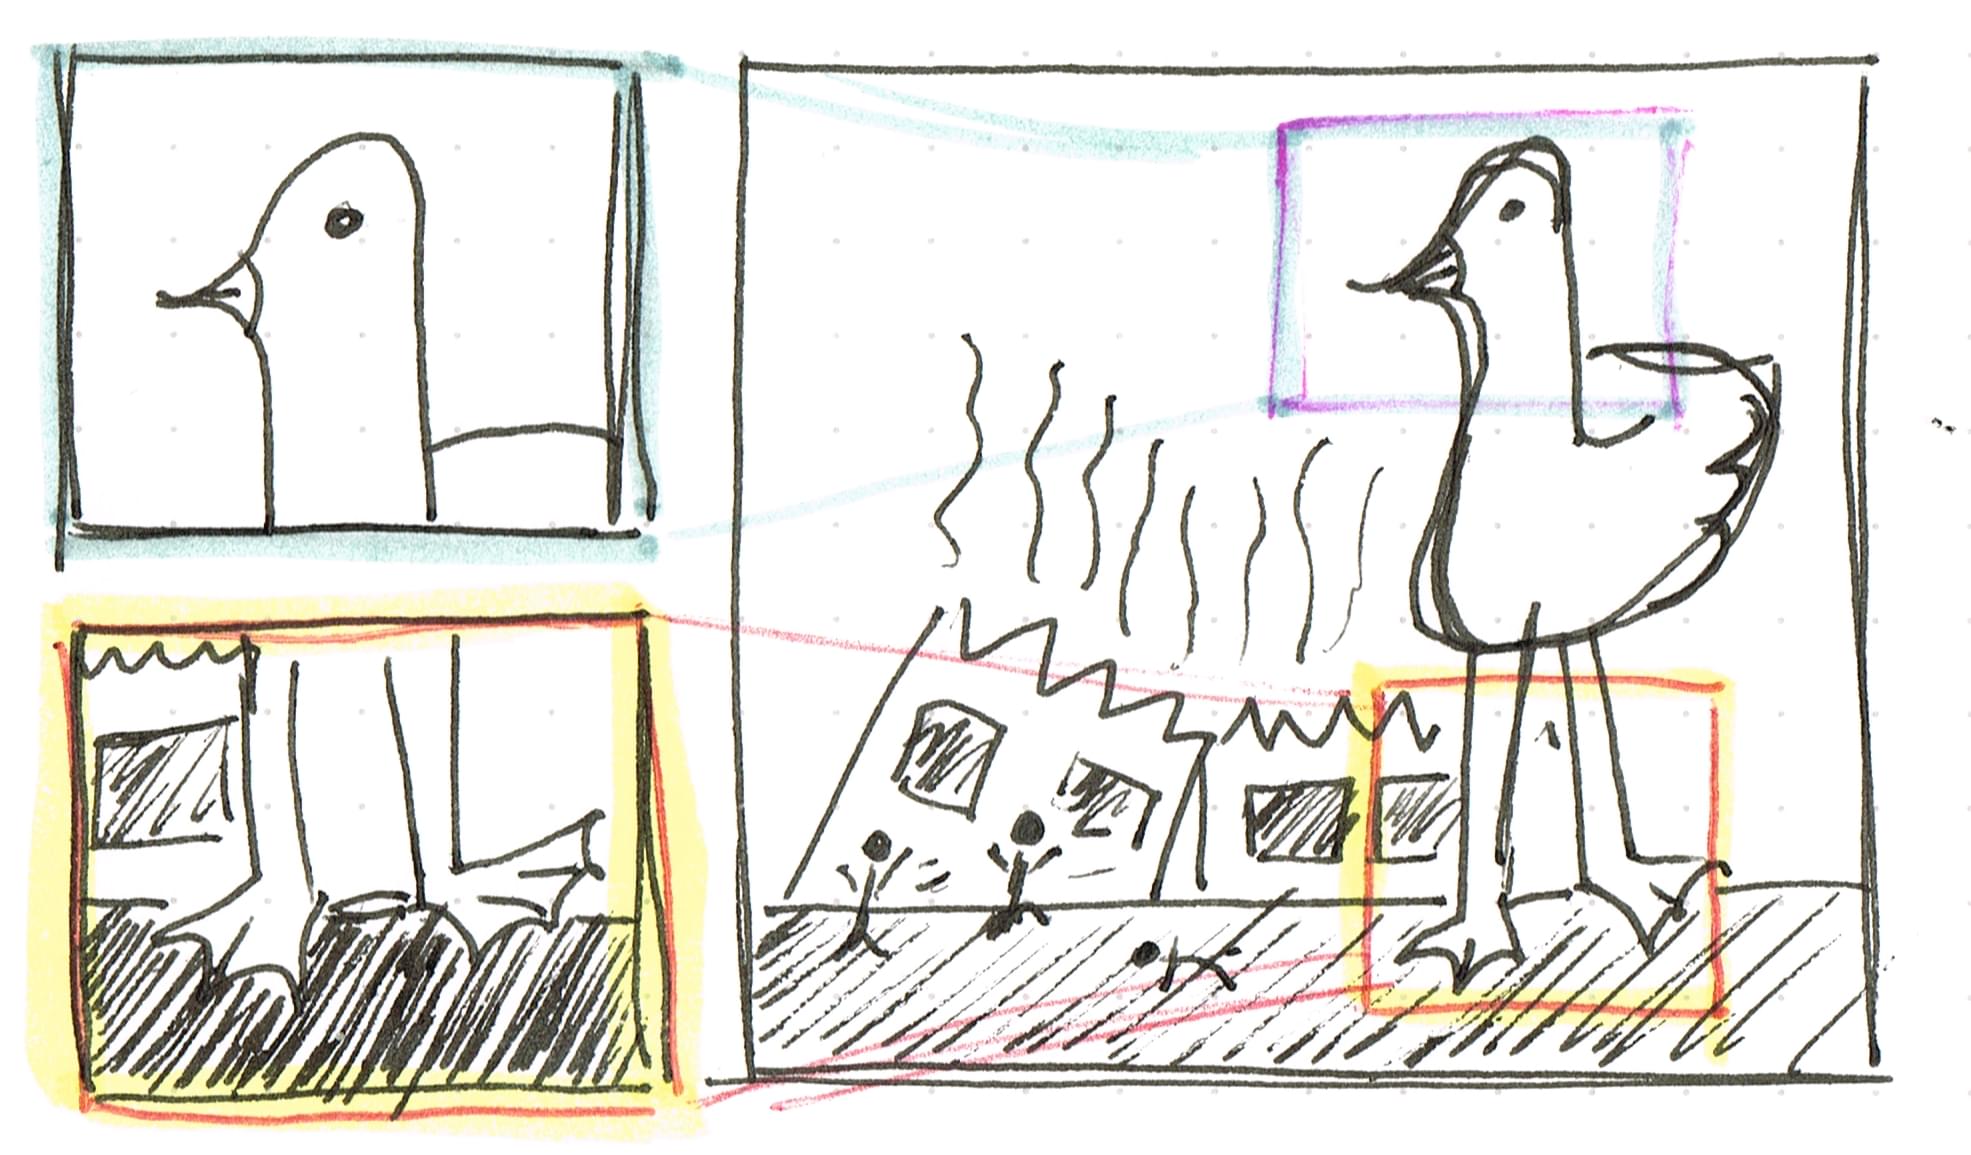 A sketch with three frames, the two smaller frames illustrating the head and feet of a bird which are portions of the larger frame, which shows the bird destroying a building and people running away